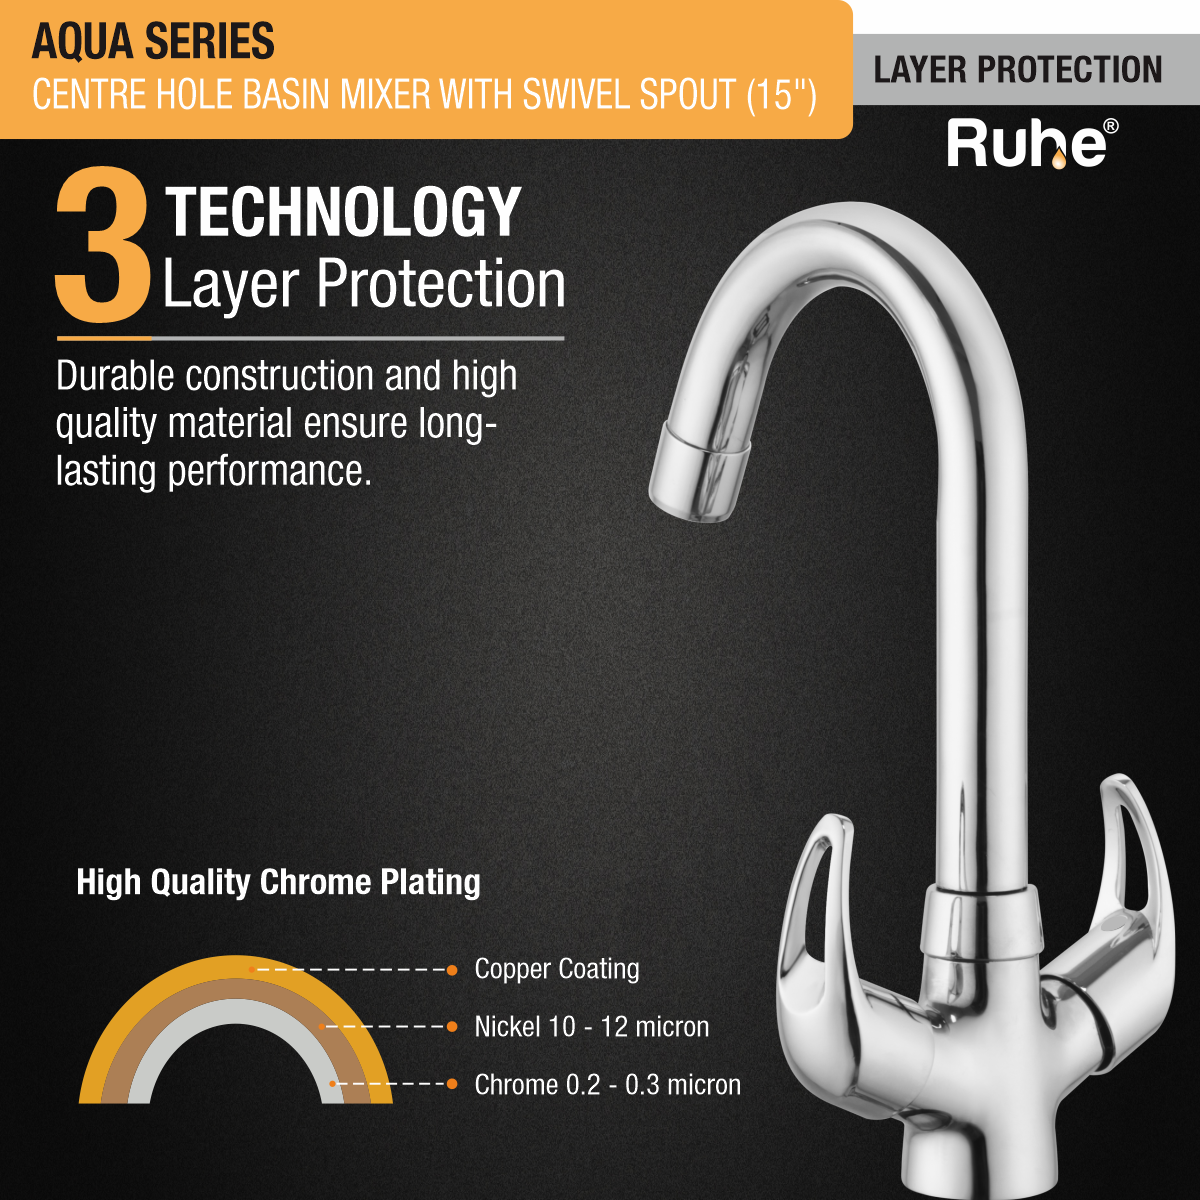 Aqua Centre Hole Basin Mixer with Medium (15 inches) Round Swivel Spout Faucet 3 layer protection